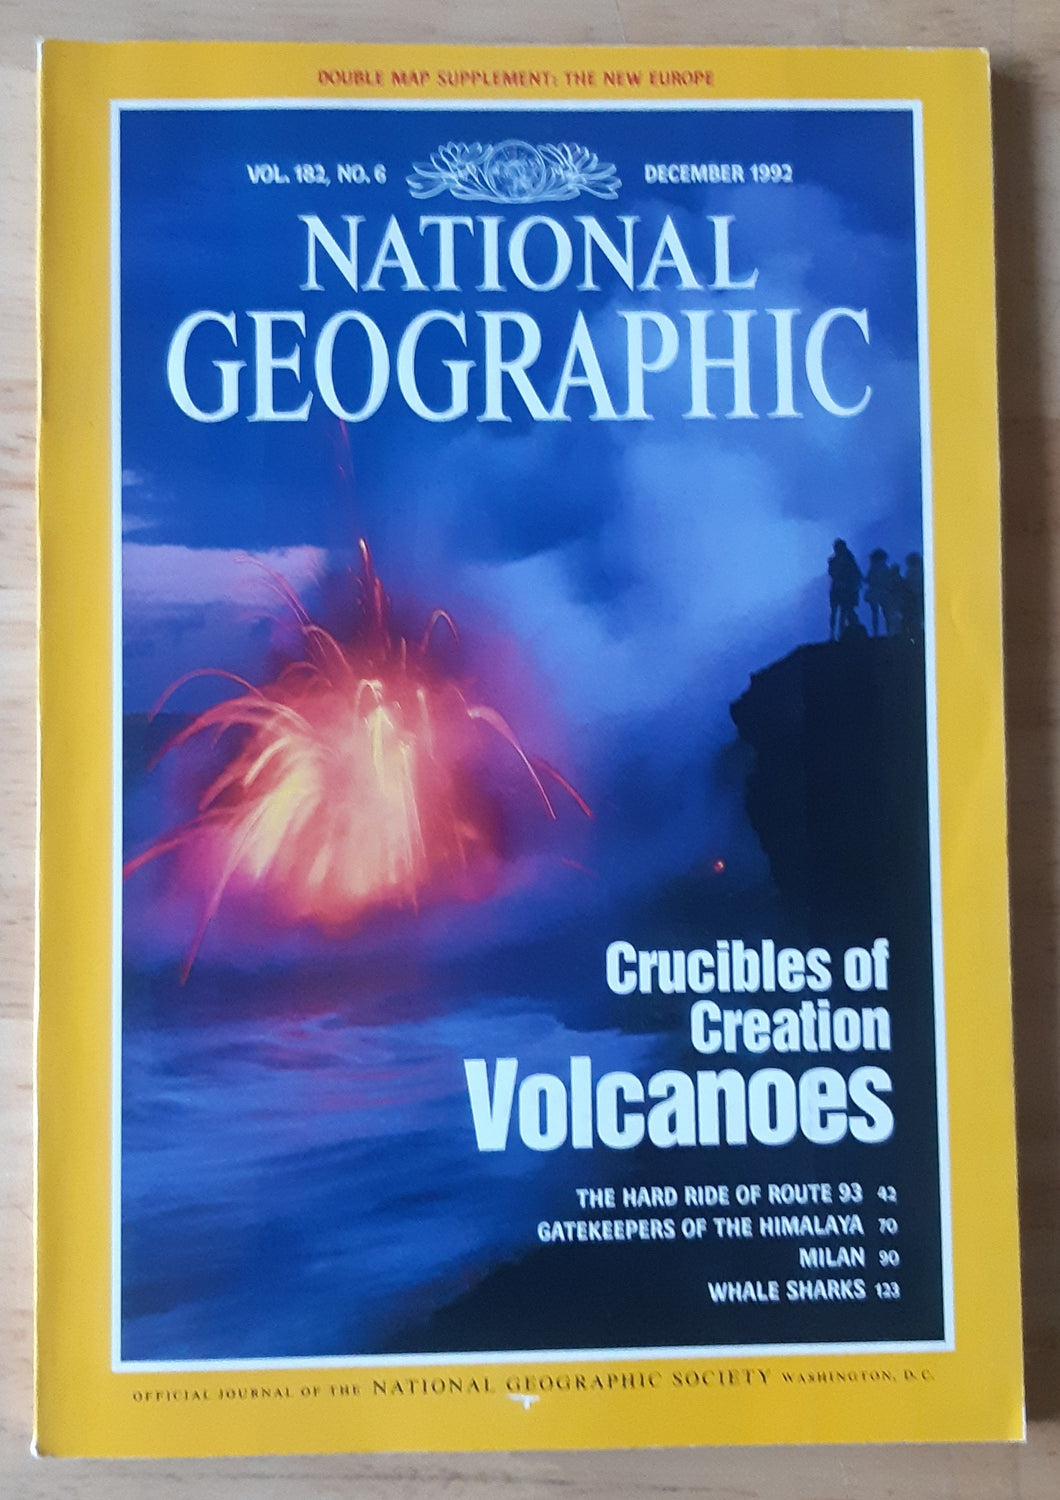 National Geographic - December 1992 (Vol. 182, No. 6)